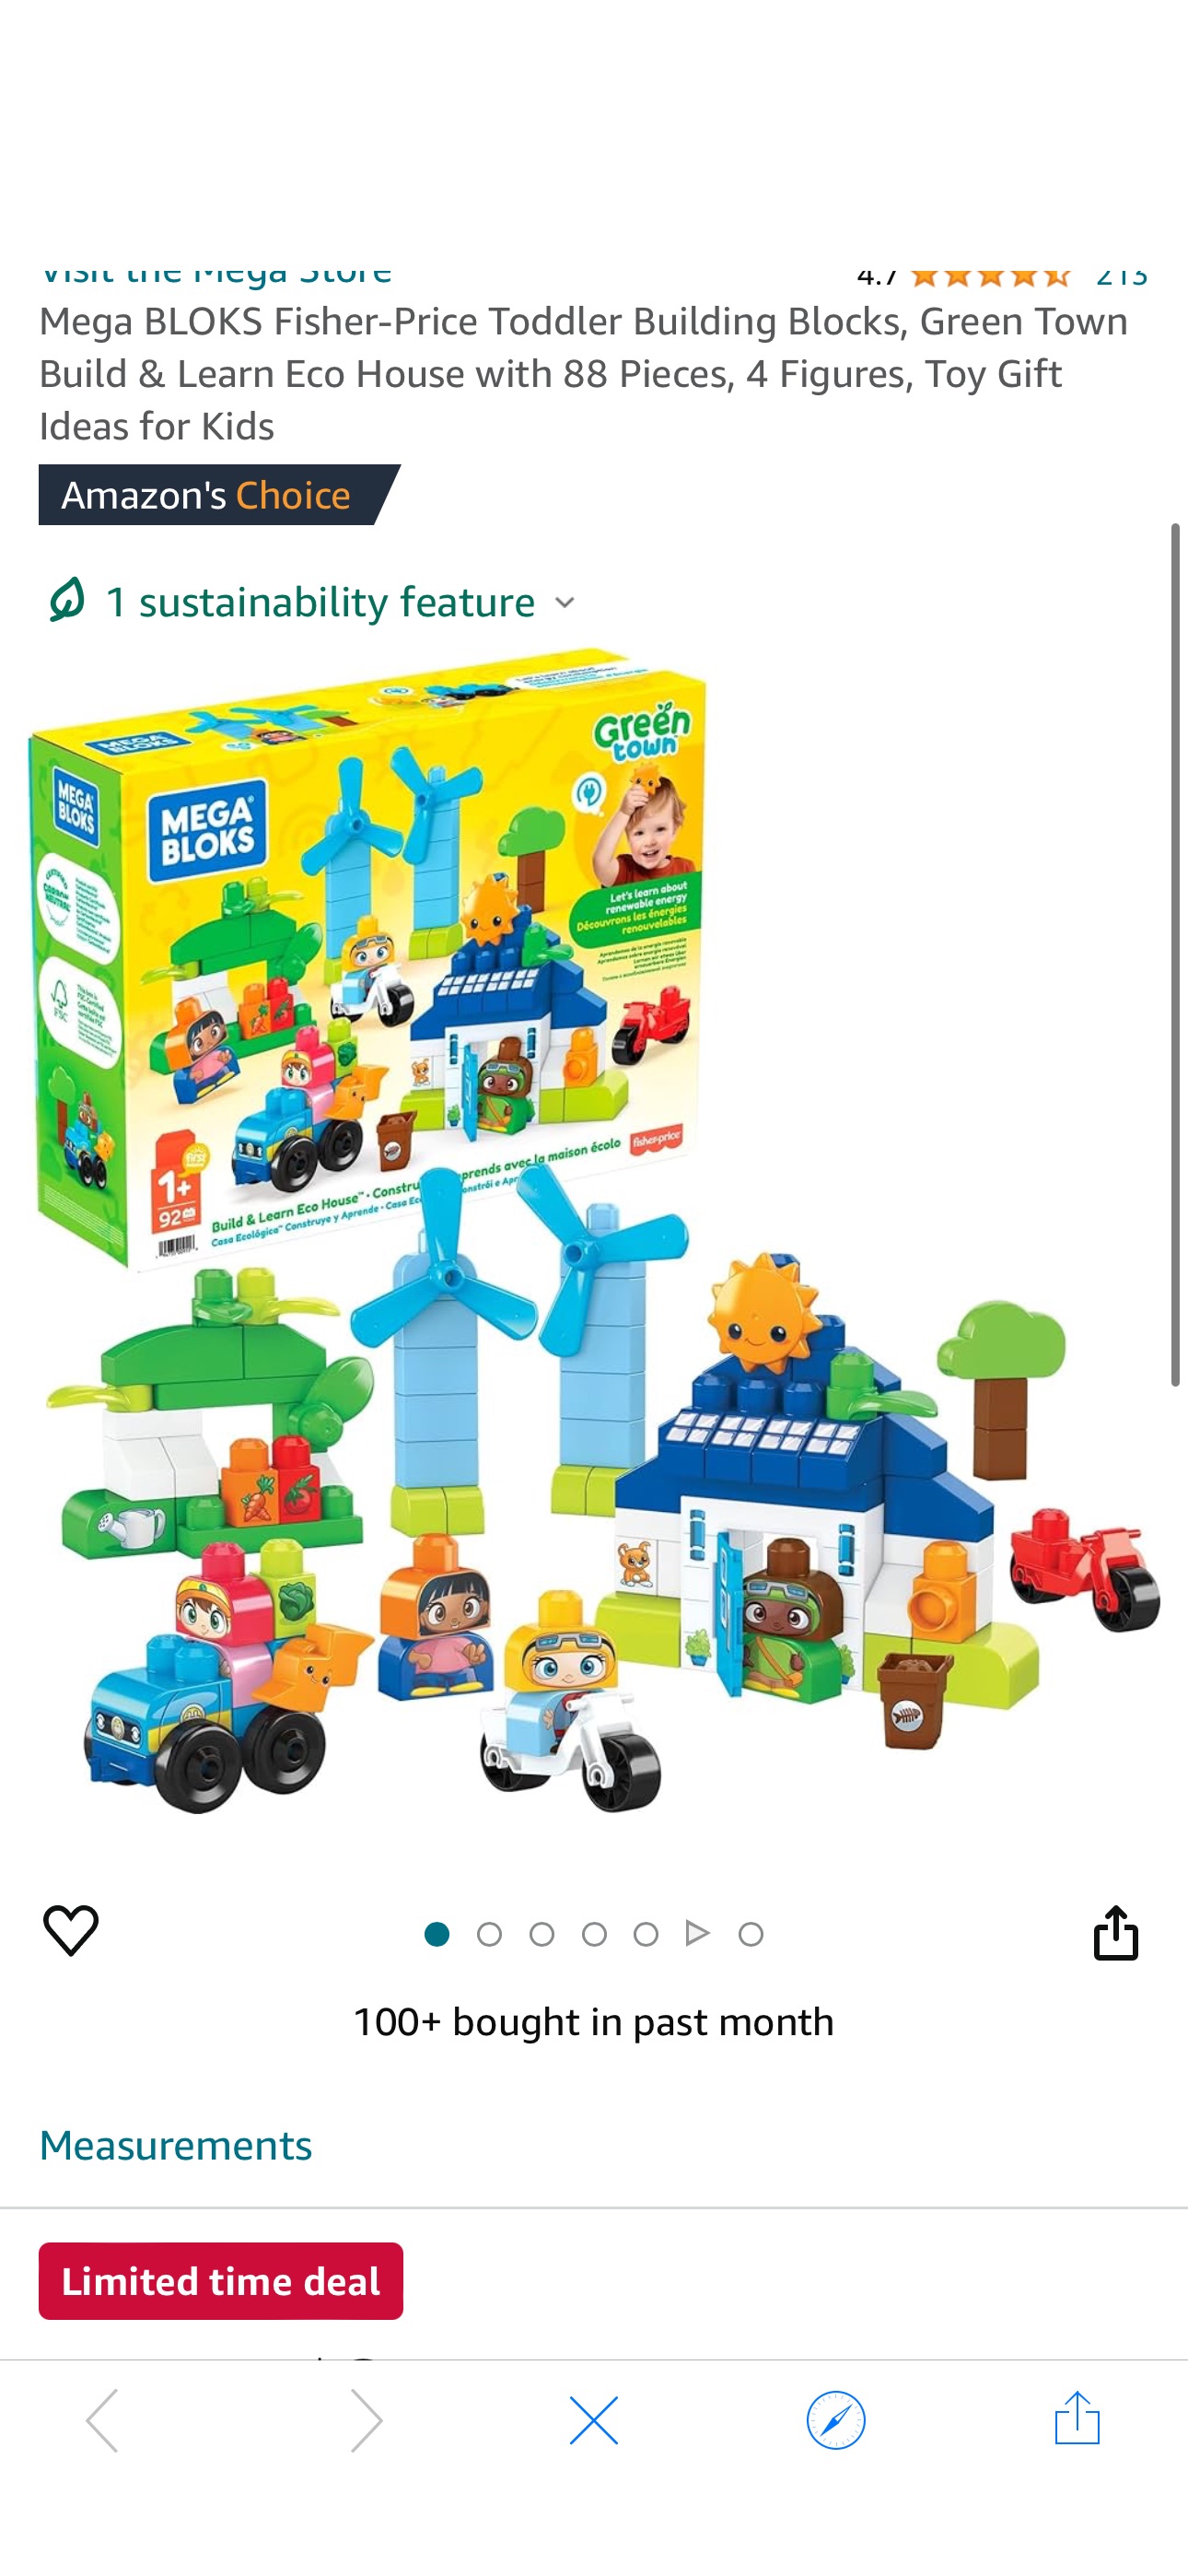 Amazon.com: Mega BLOKS Fisher-Price Toddler Building Blocks, Green Town Build & Learn Eco House with 88 Pieces, 4 Figures, Toy Gift Ideas for Kids : Toys & Games